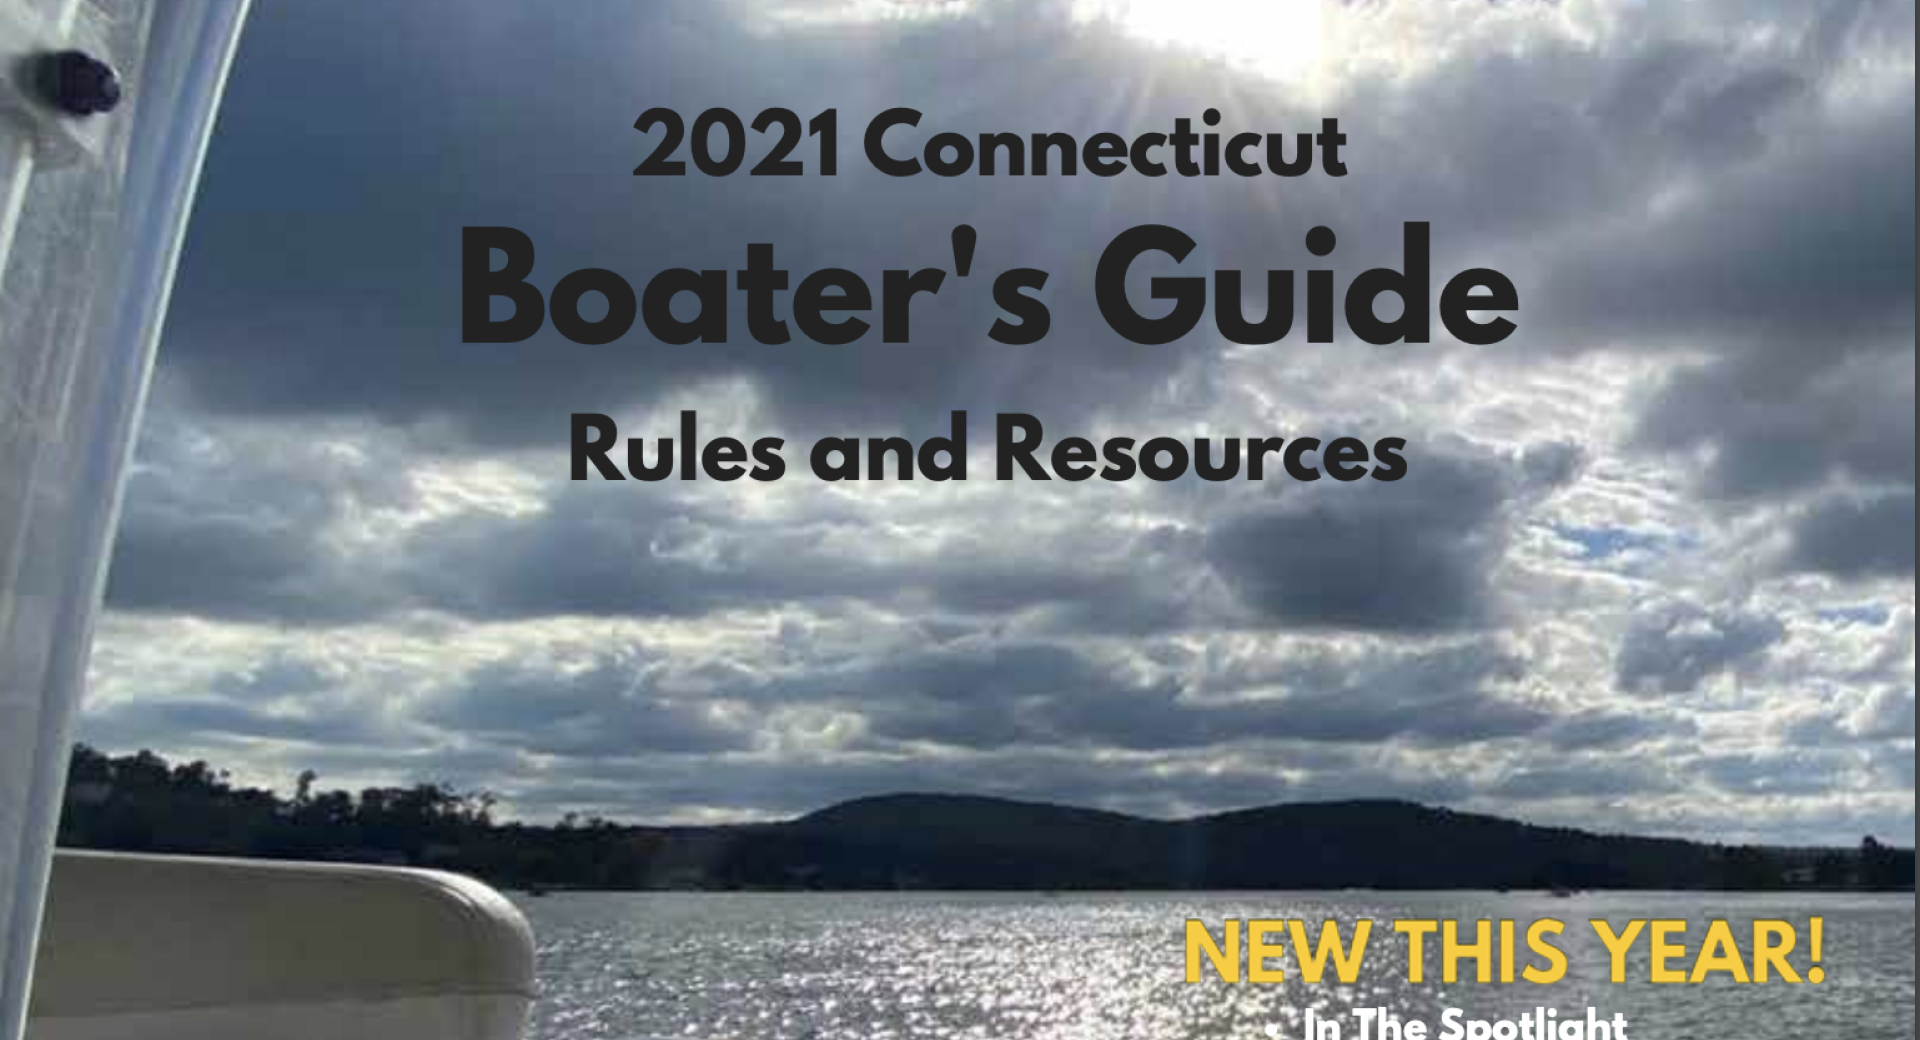 DEEP Publishes a Boaters' Guide for 2021